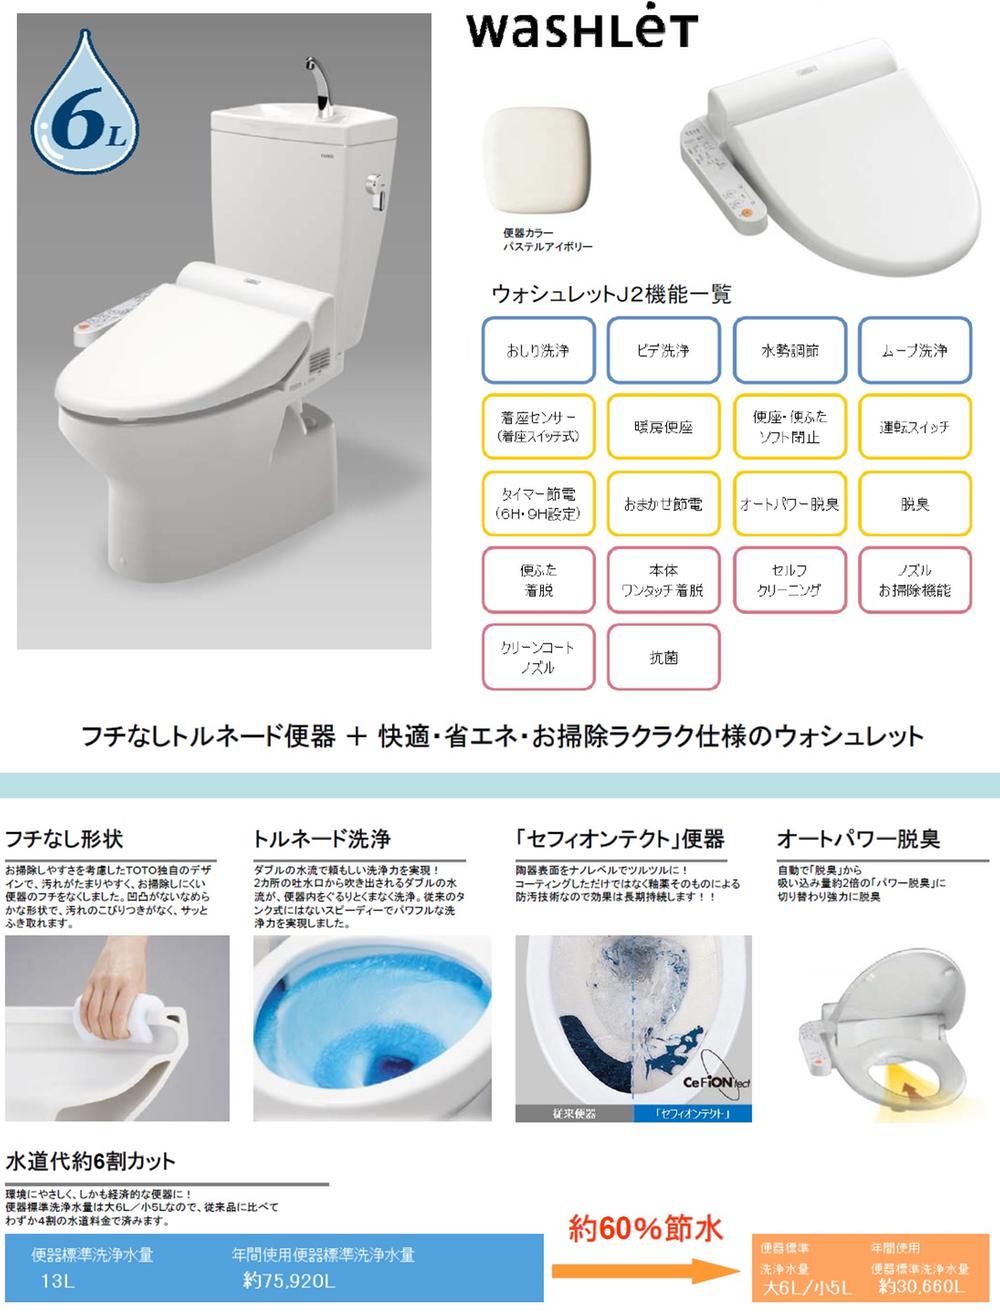 Construction ・ Construction method ・ specification.  ・ Borderless shape in consideration of the cleaning ease